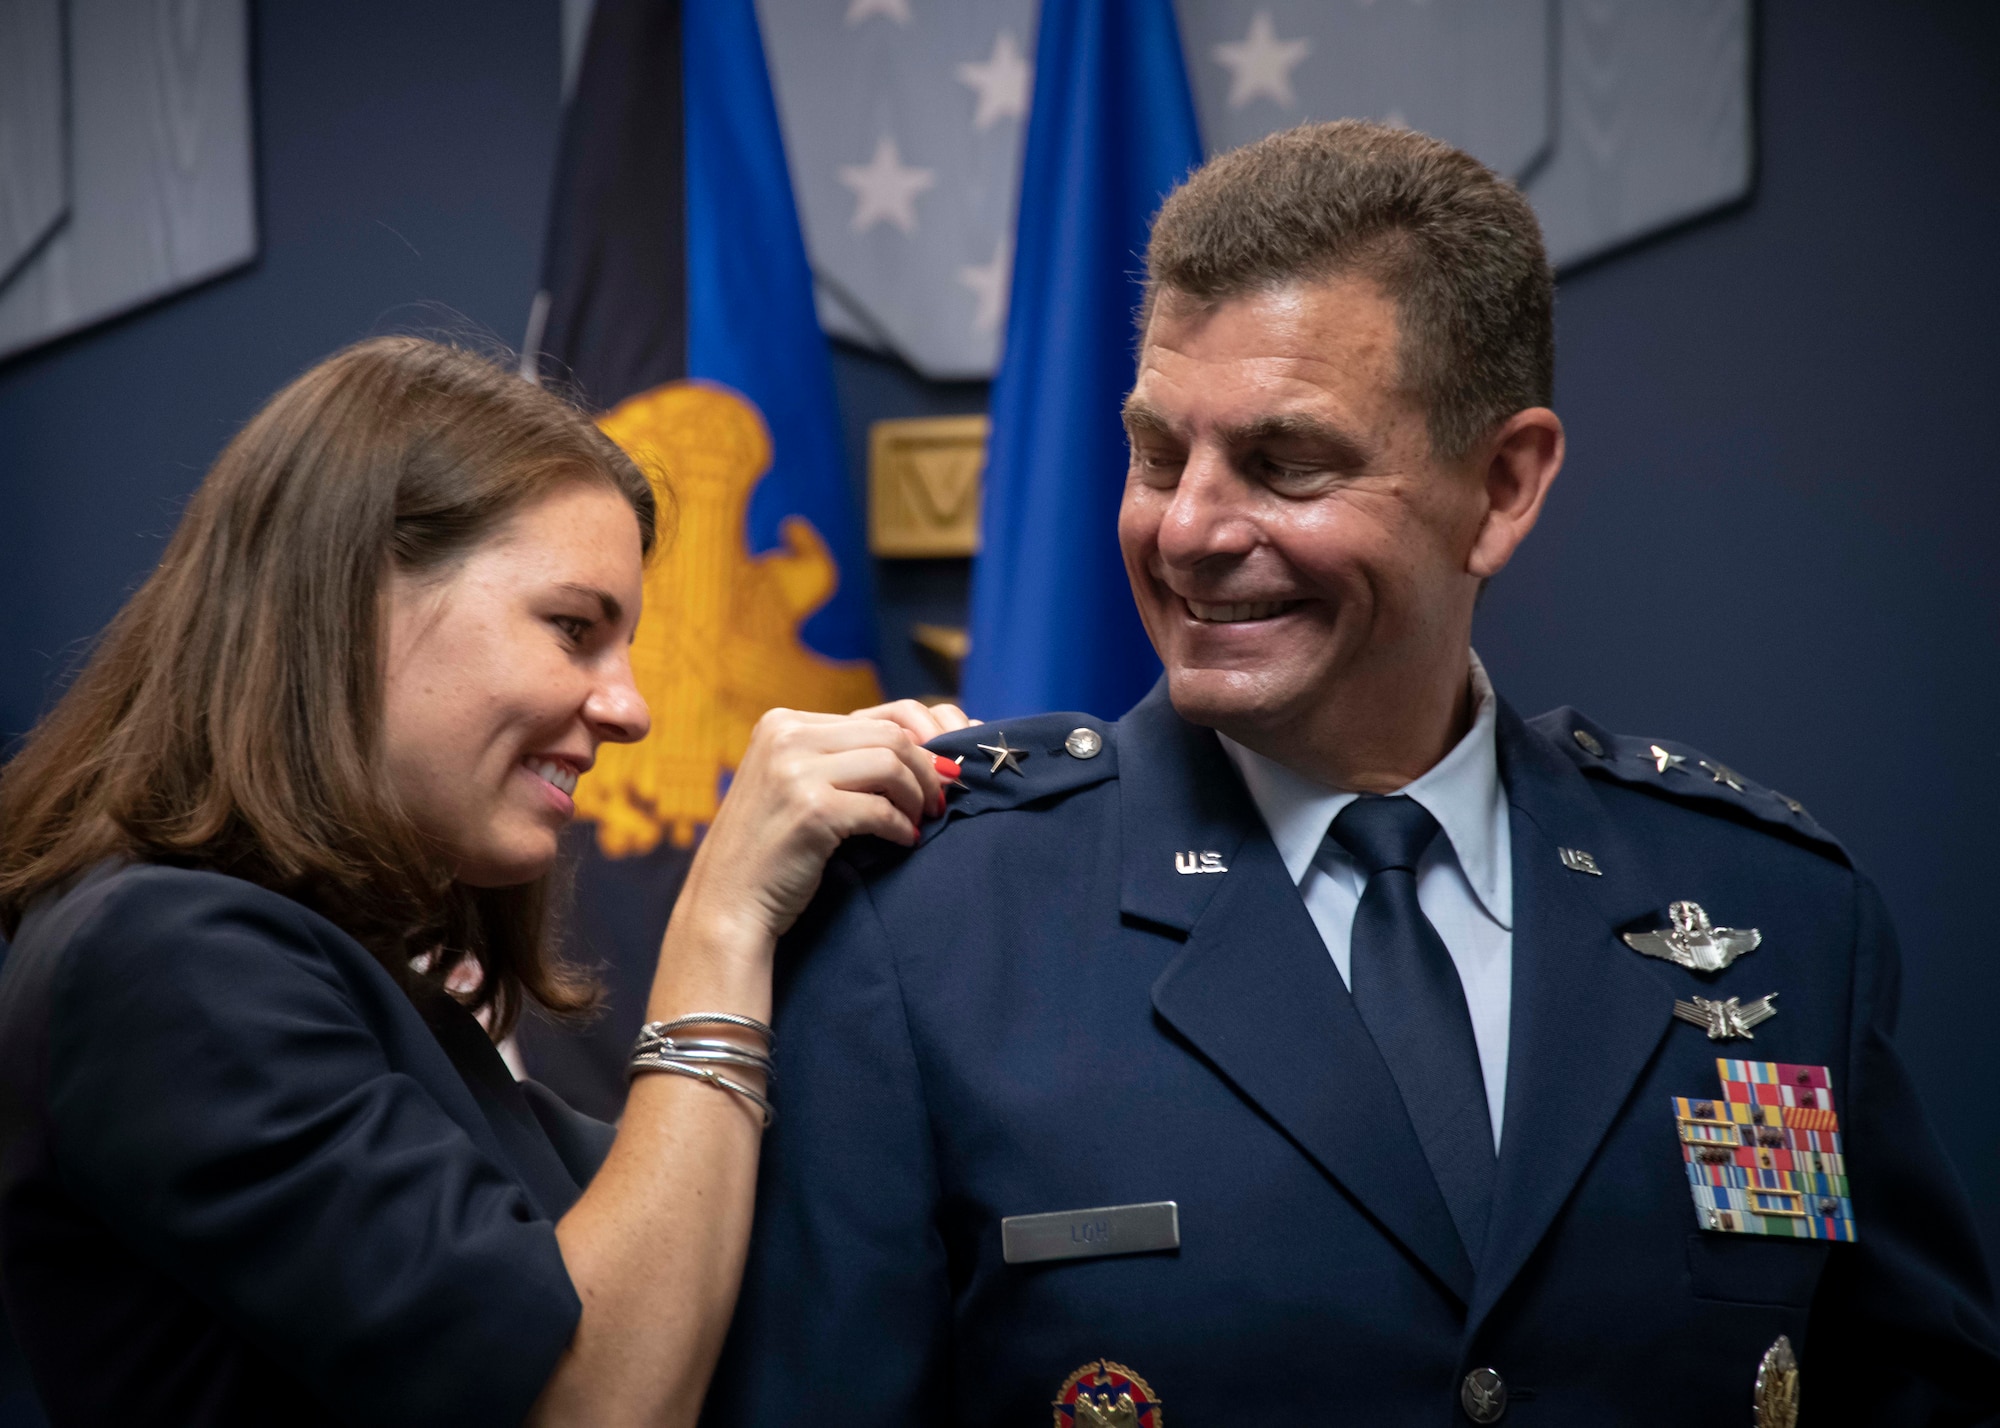 U.S. Air Force Maj. Gen. Michael A. Loh is promoted to the rank of lieutenant general during a Change of Responsibility ceremony at the Pentagon July 28, 2020. Loh’s wife, Diane, and daughter, Heather, pinned the new lieutenant general insignia on his service jacket. (U.S. Air National Guard photo by Technical Sgt. Morgan R. Lipinski)